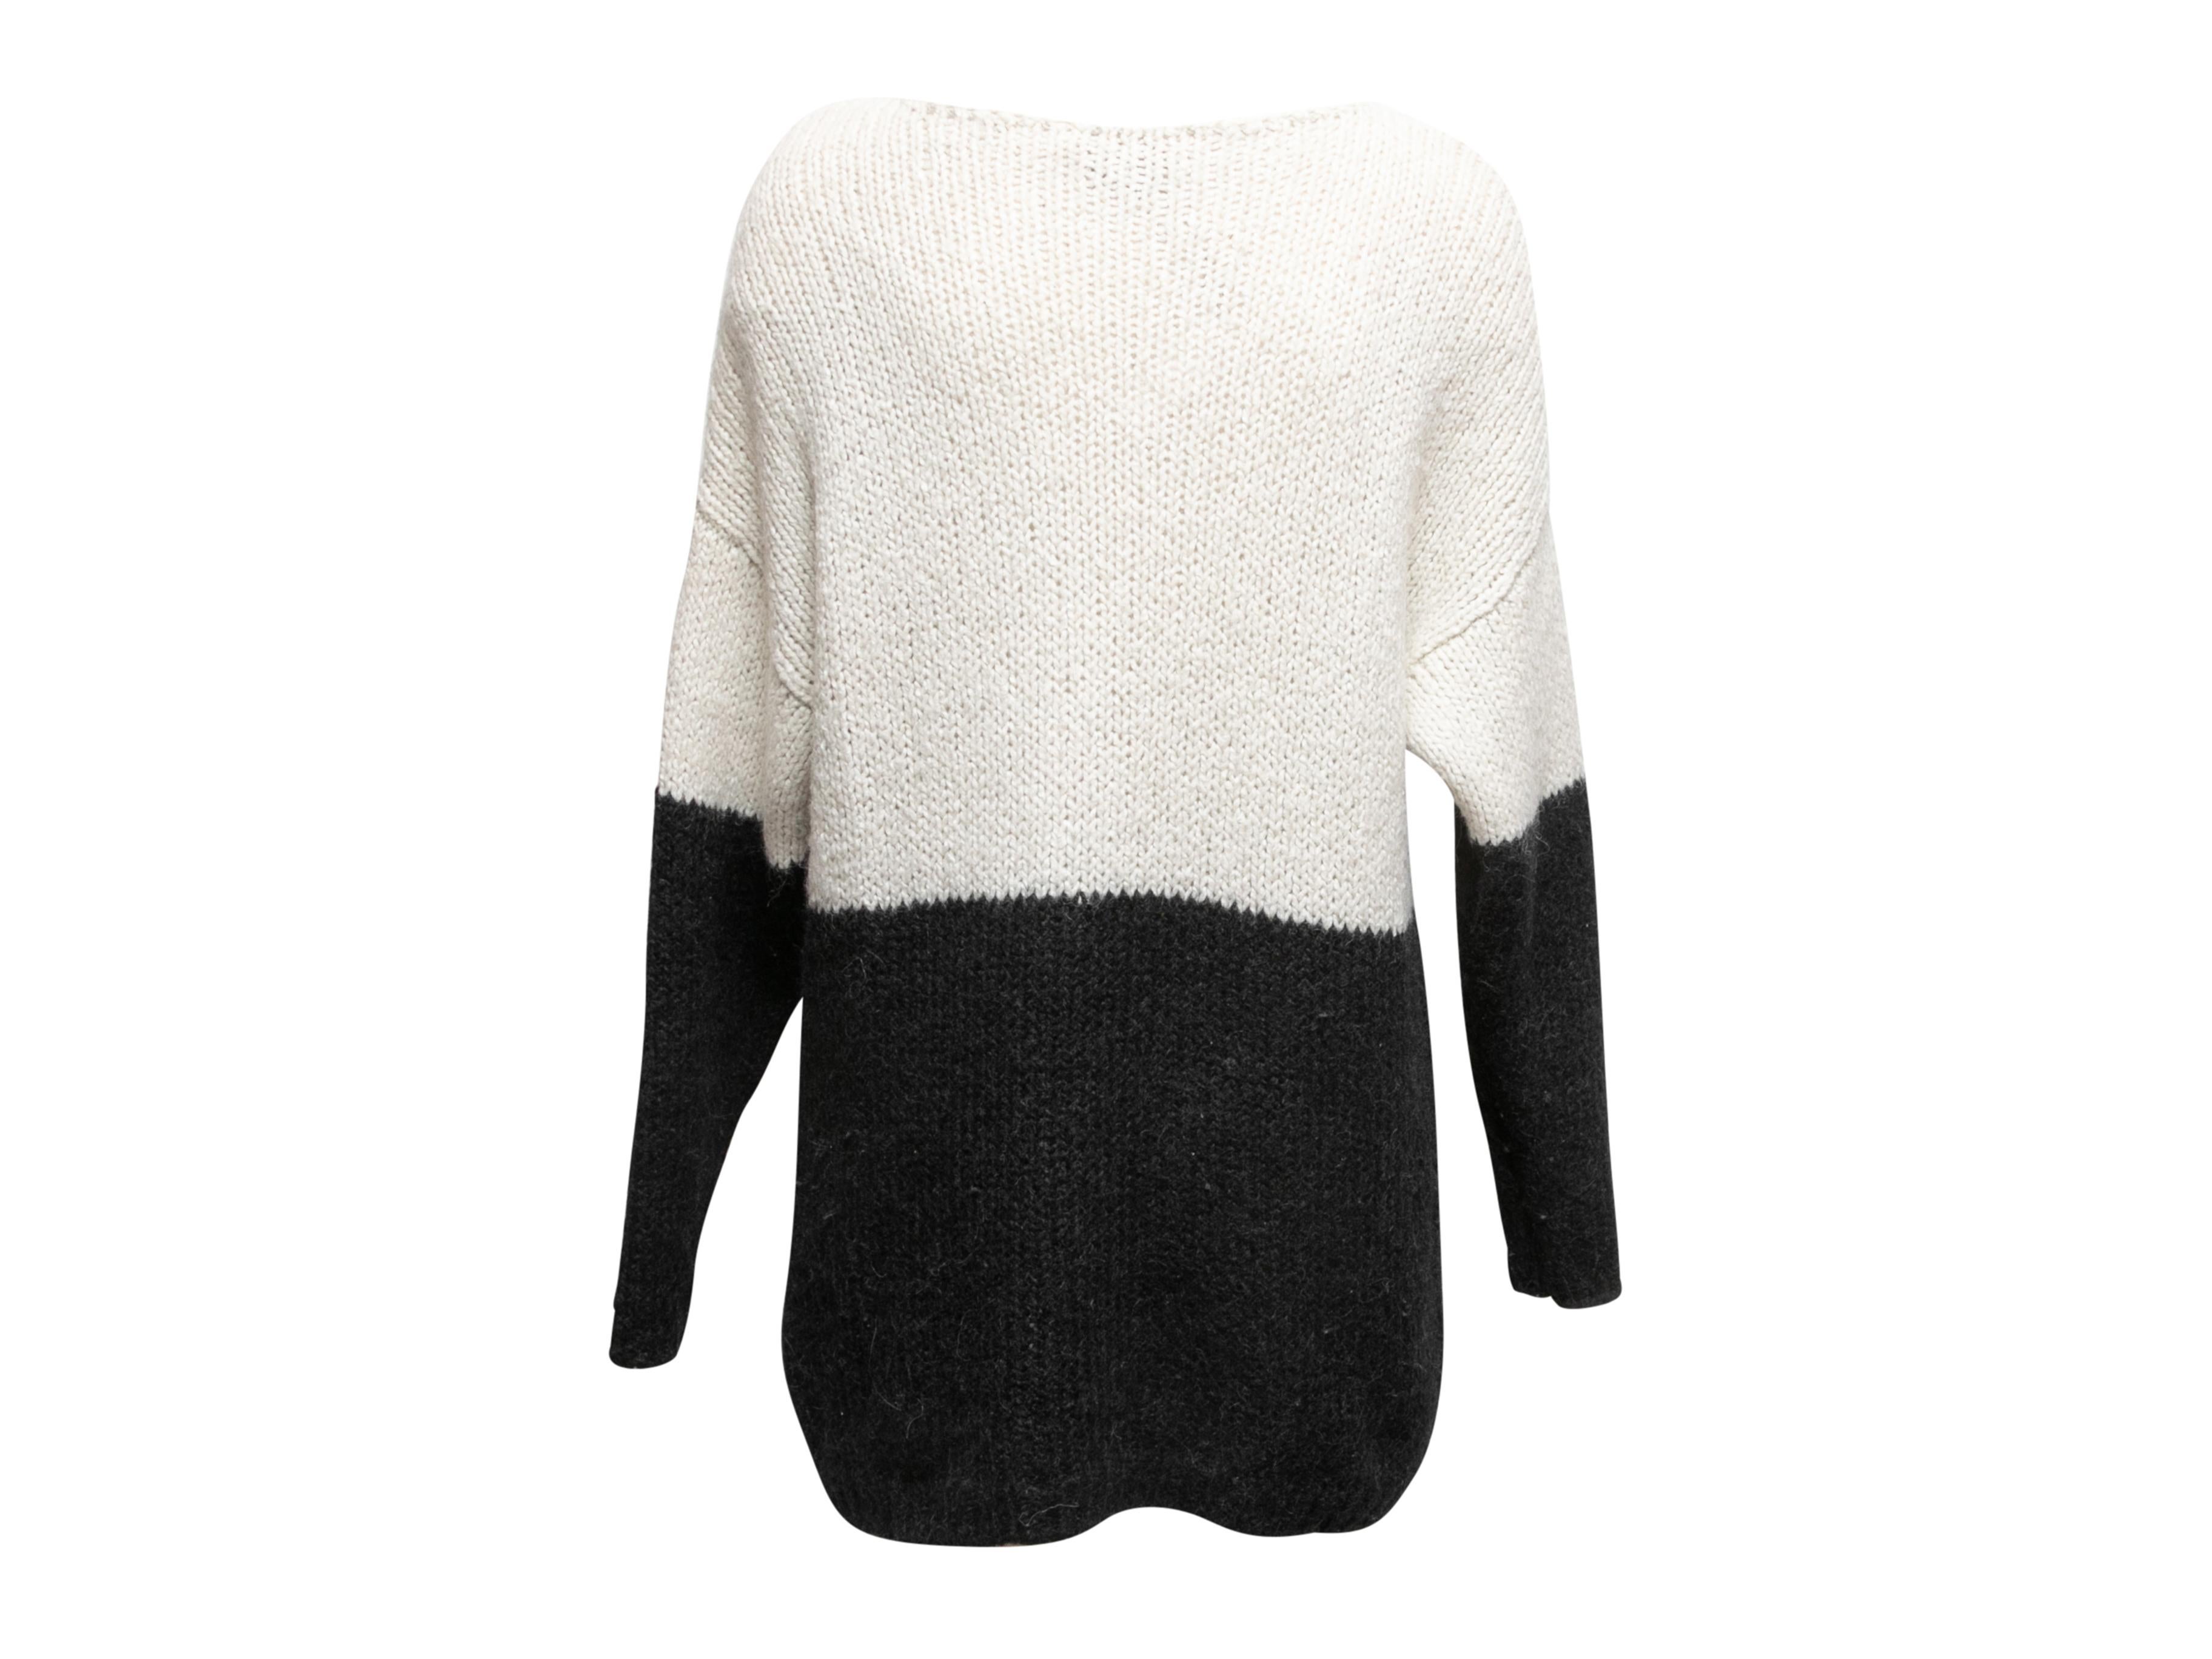 White and black alpaca and silk-blend color block sweater by Alice + Olivia. Bateau neckline. 38